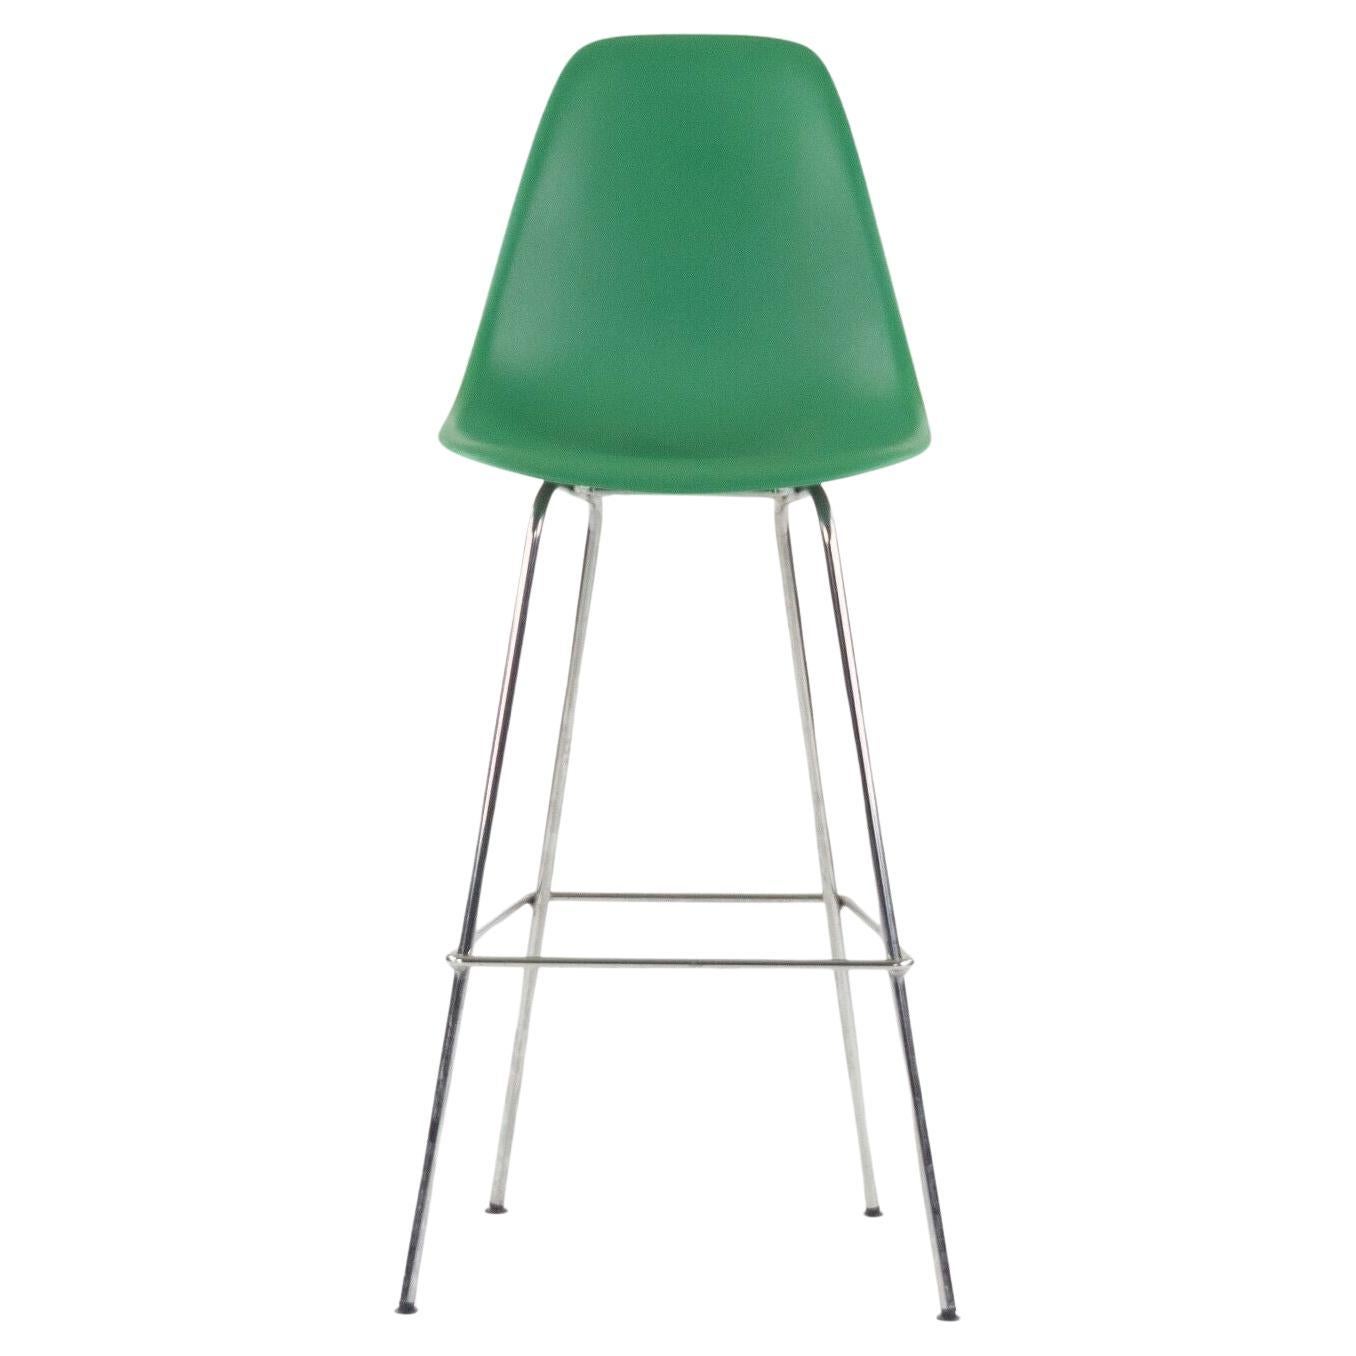 Ray and Charles Eames Herman Miller Molded Shell Bar Stool Chair Kelly Green For Sale